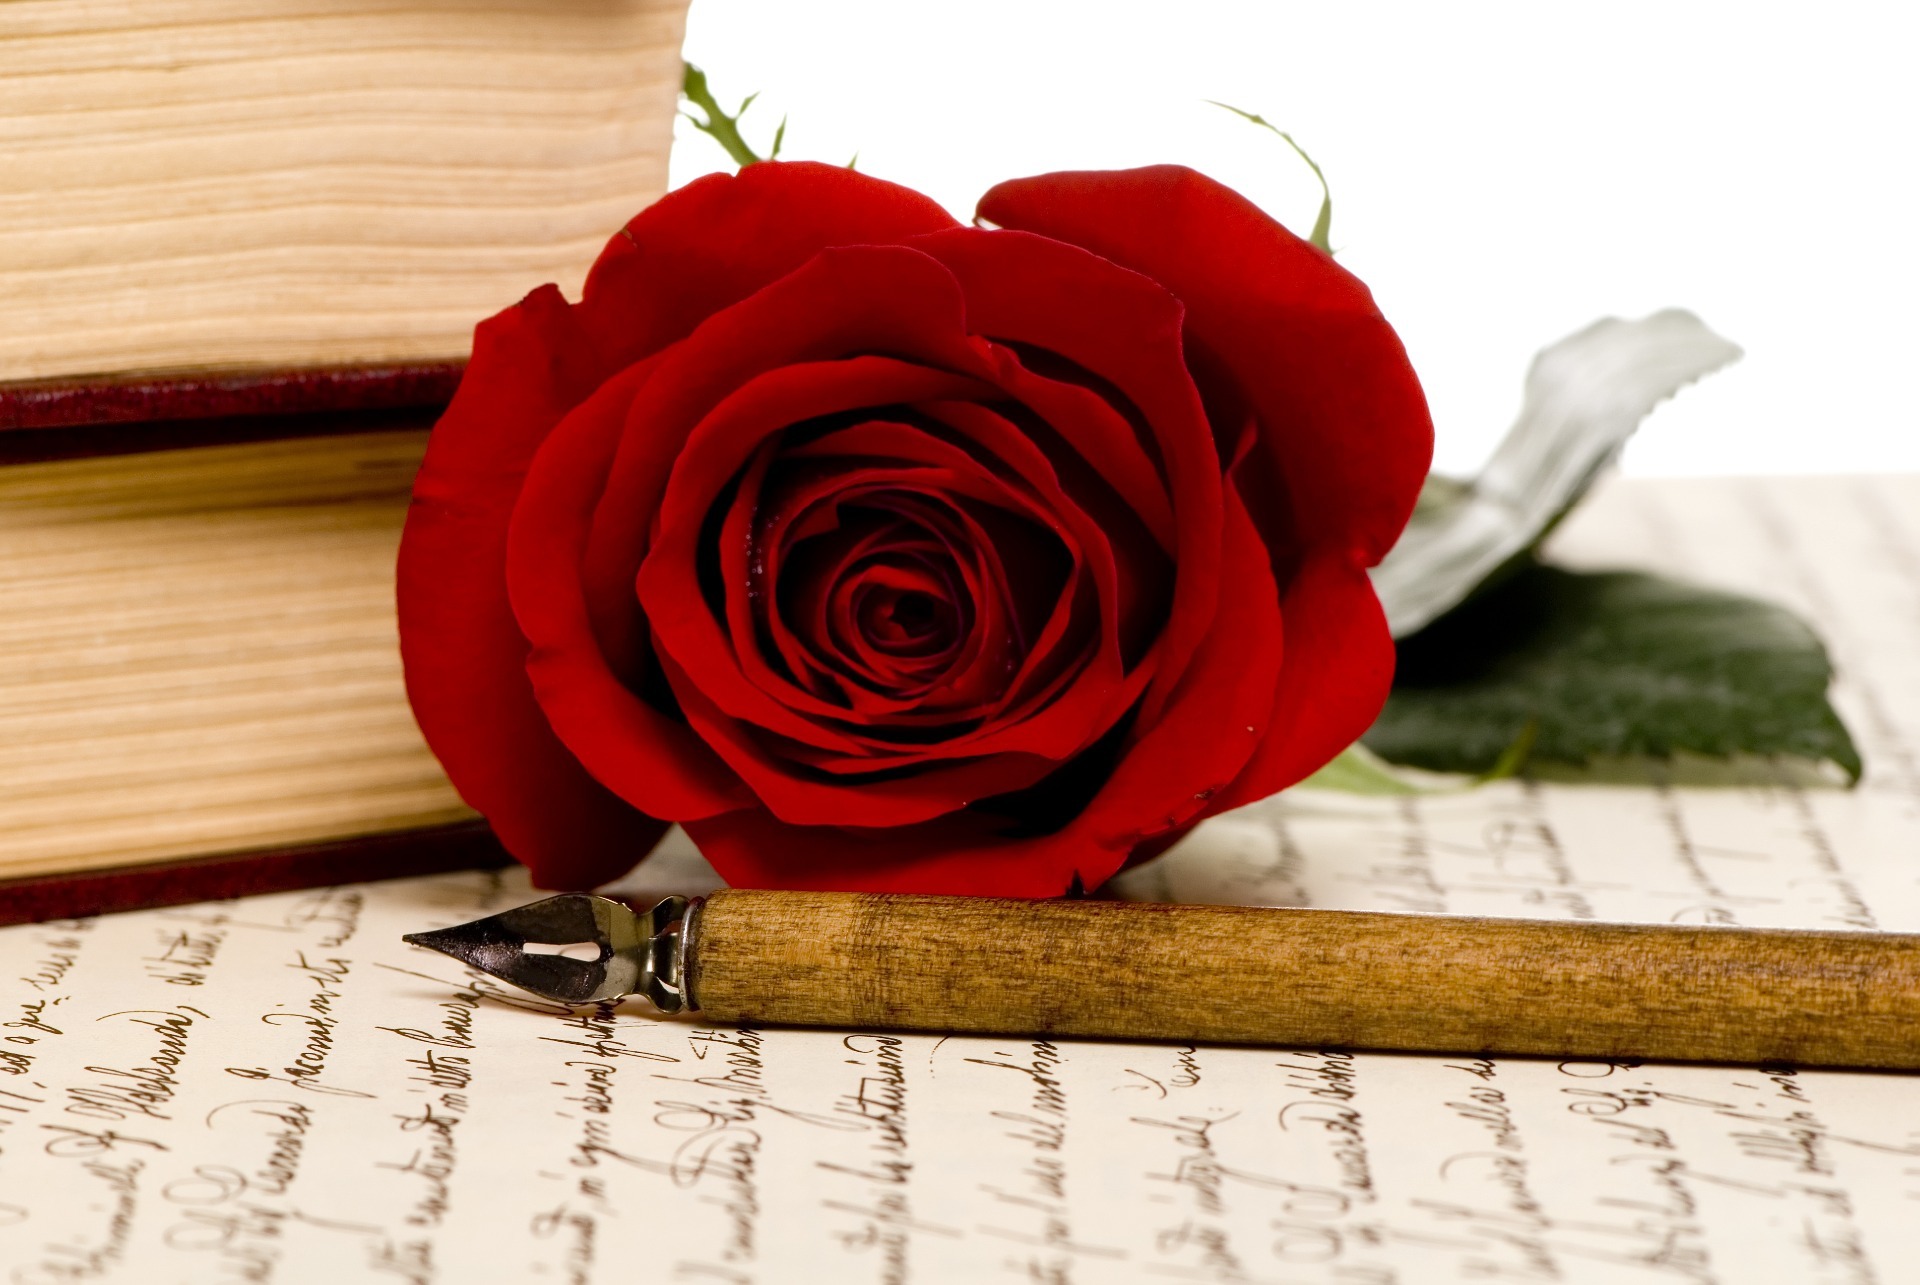 A red rose resting on top of a written Will